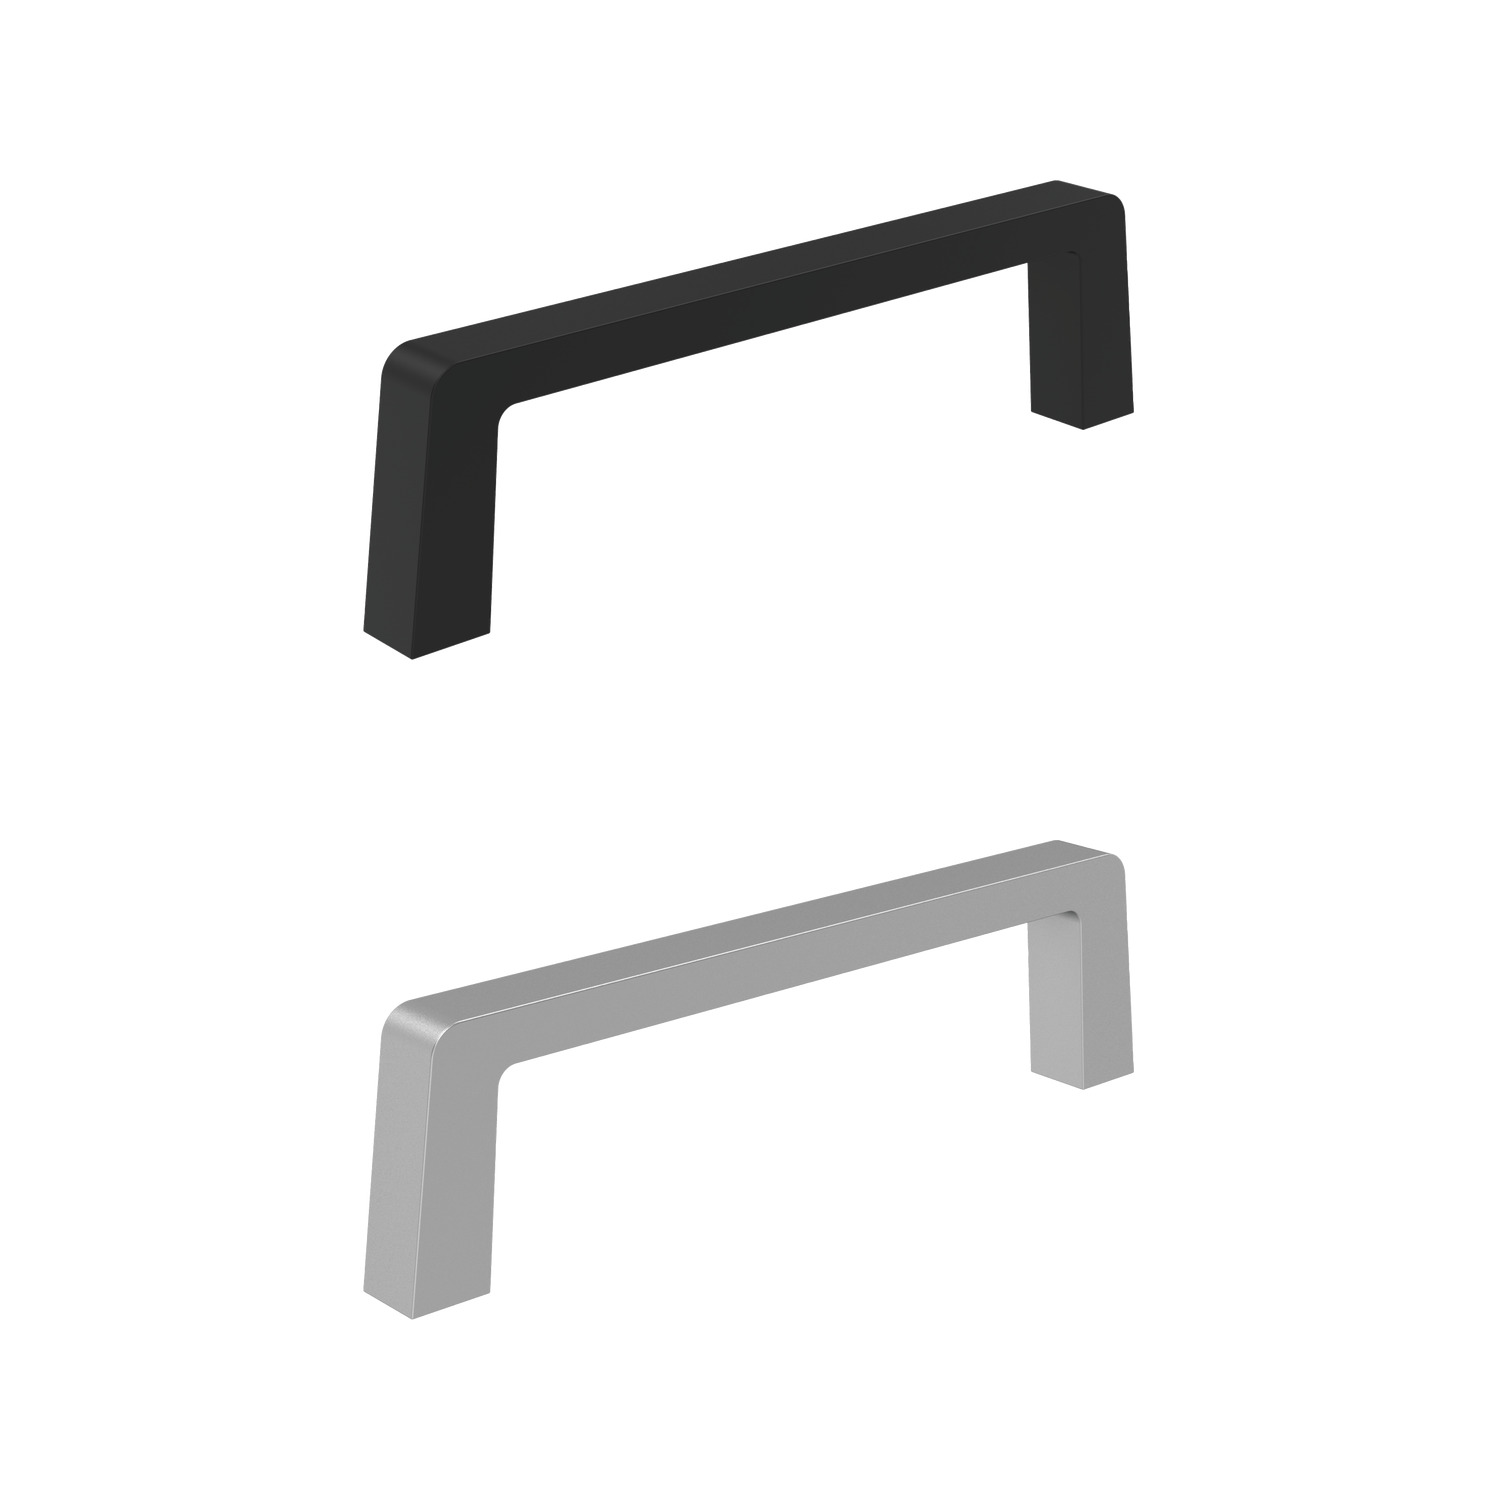 Product 78130, Pull Handles - Aluminium for 19" drawers and instrument panels / 